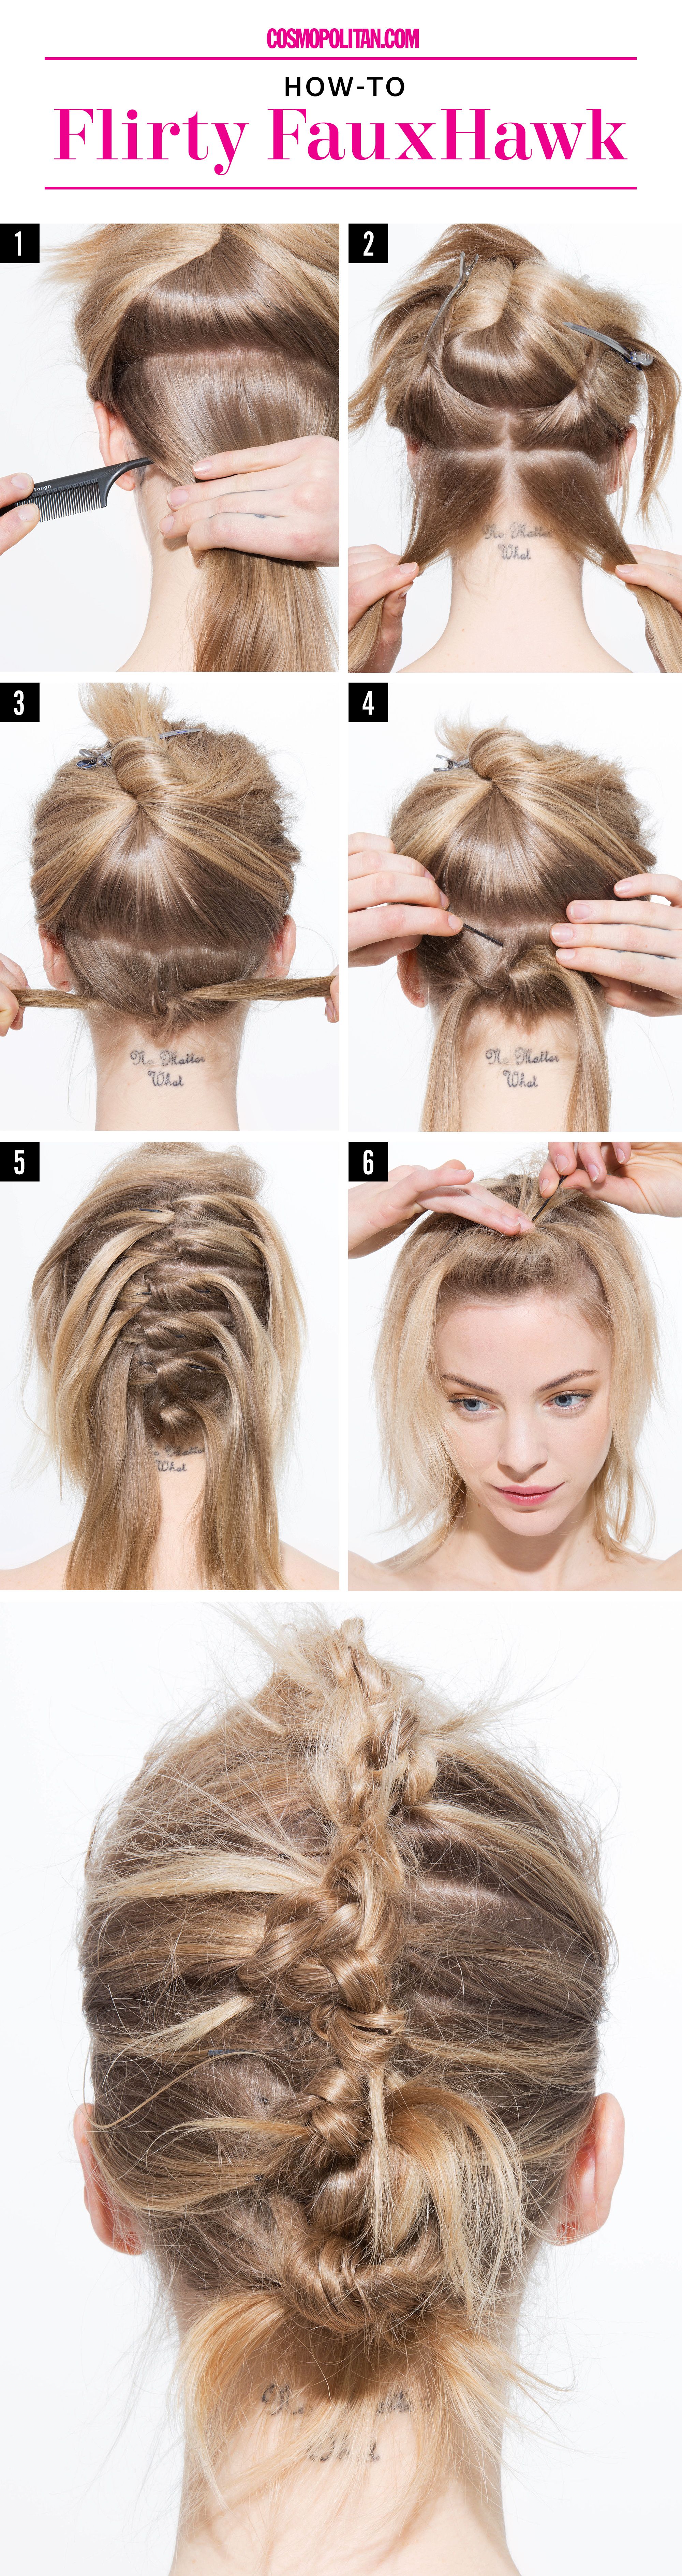 4 Last-Minute DIY Evening Hairstyles That Will Leave You Looking Hot AF